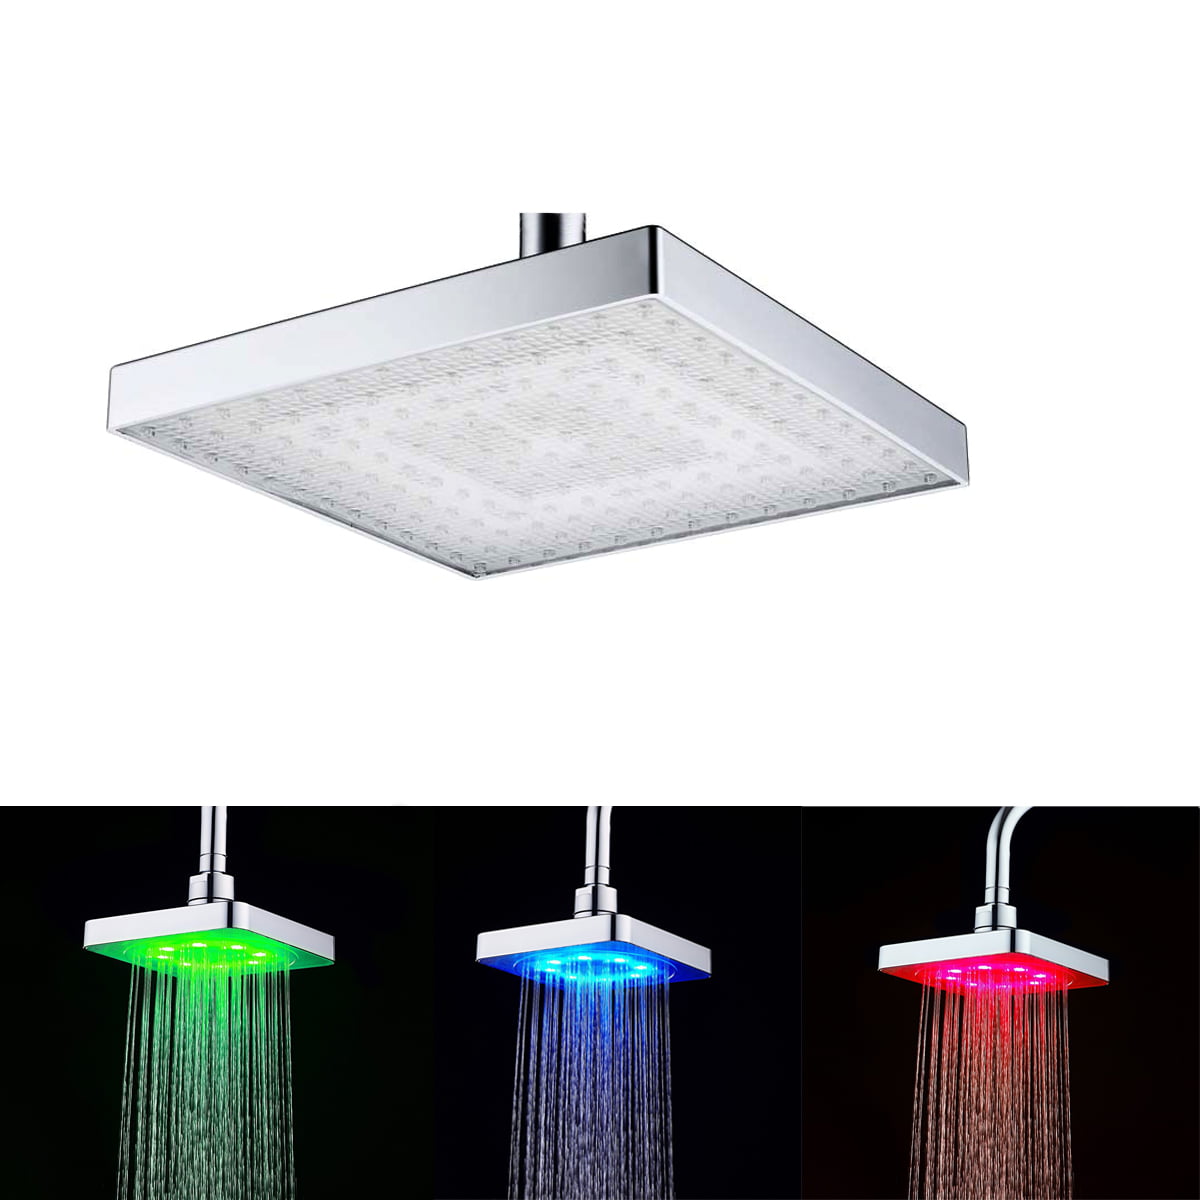 Vzer 8 inch Square 7 Colors Automatic Changing LED Shower Head Bathroom Showerheads Sprinkler